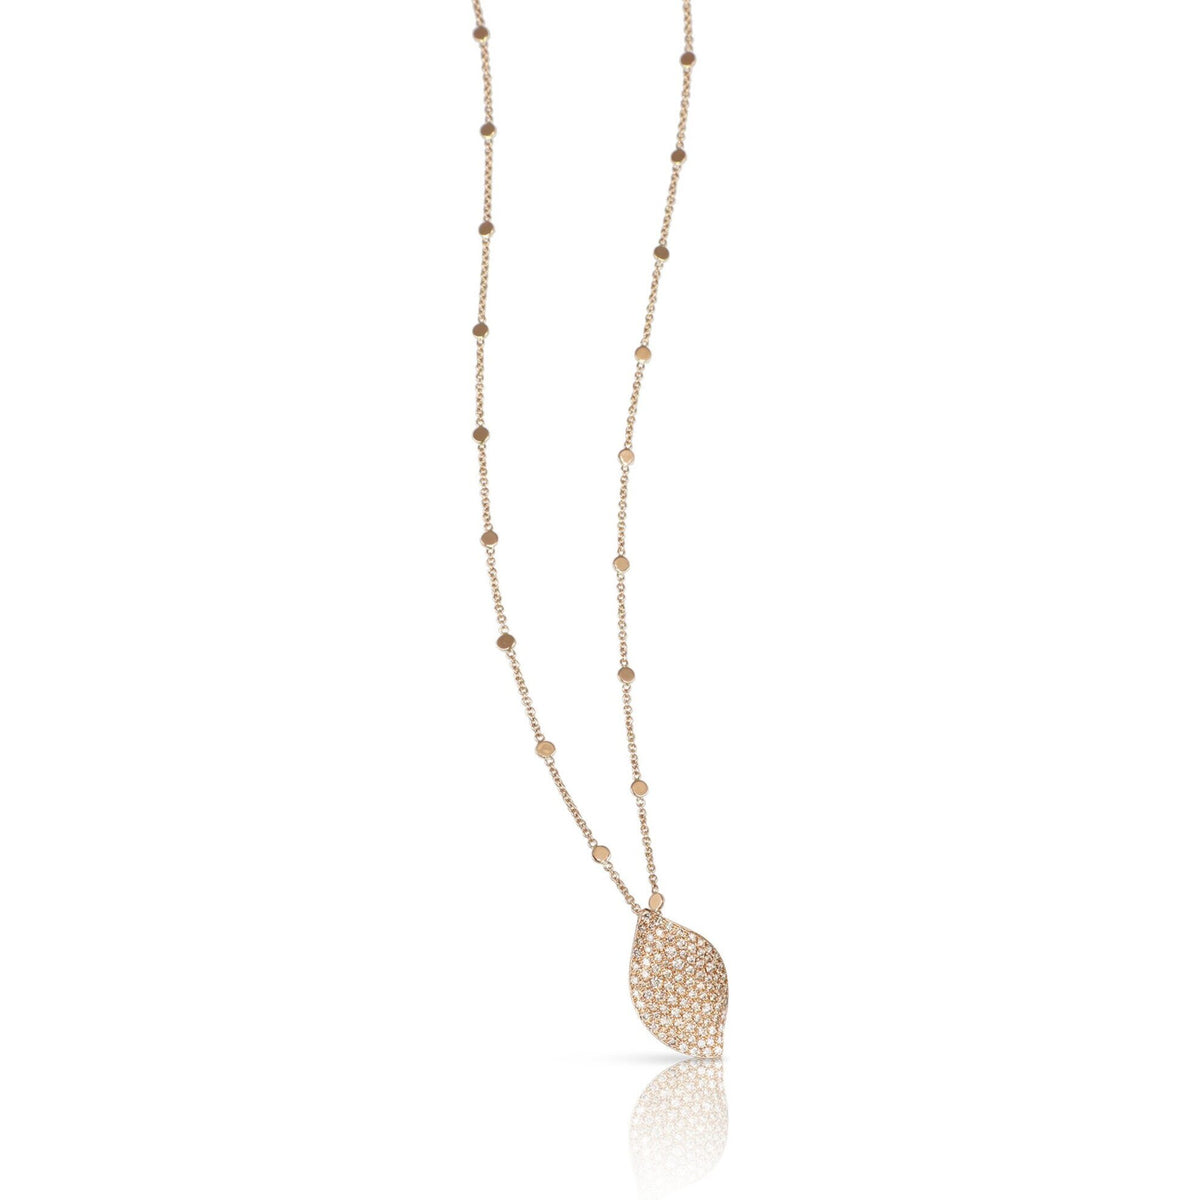 Pasquale Bruni - Aleluiá Long Necklace in 18k Rose Gold with White and Champagne Diamonds